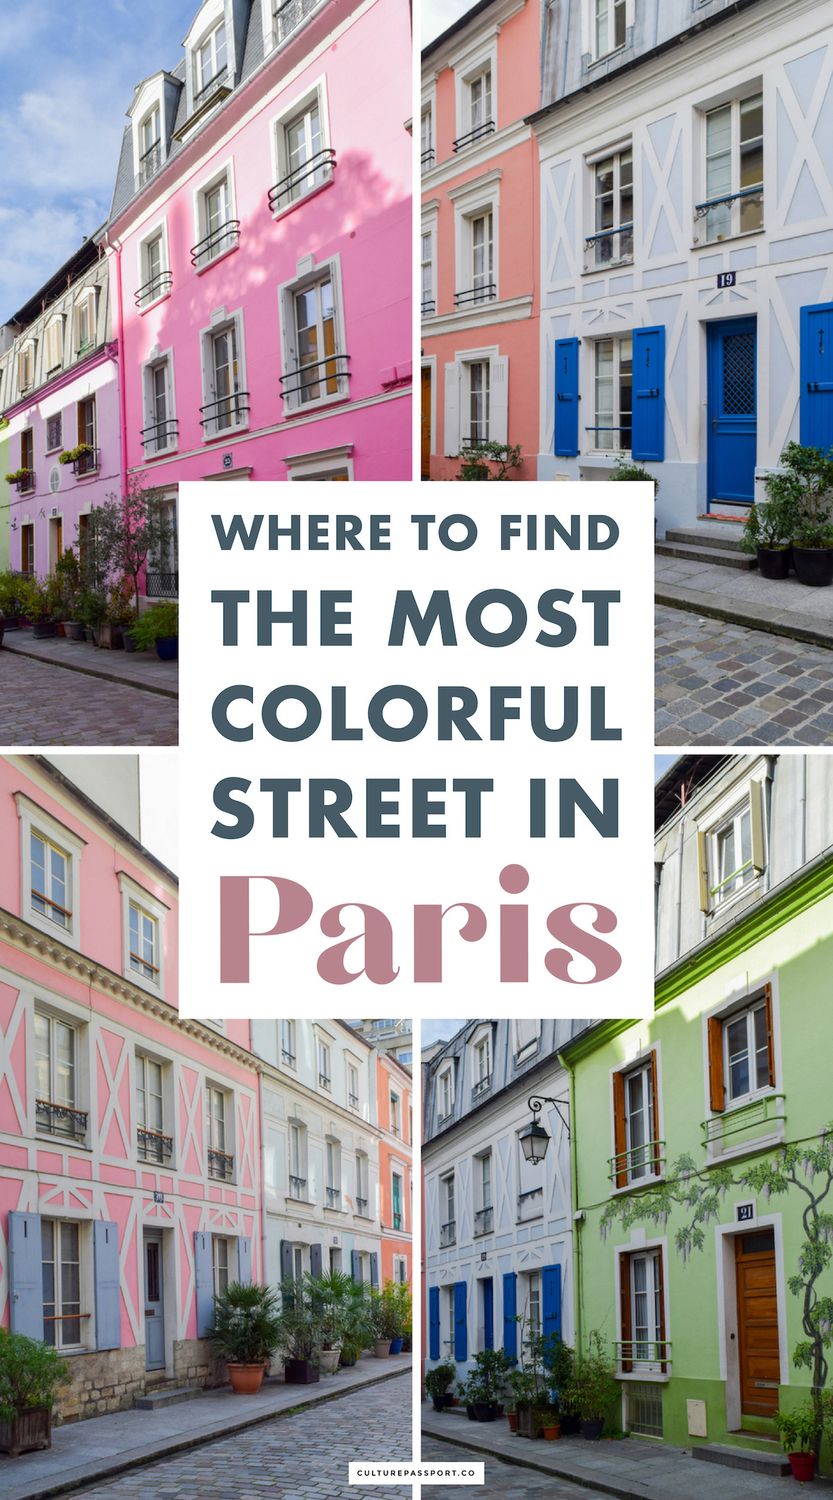 Where to Find the Most Colorful Street in Paris